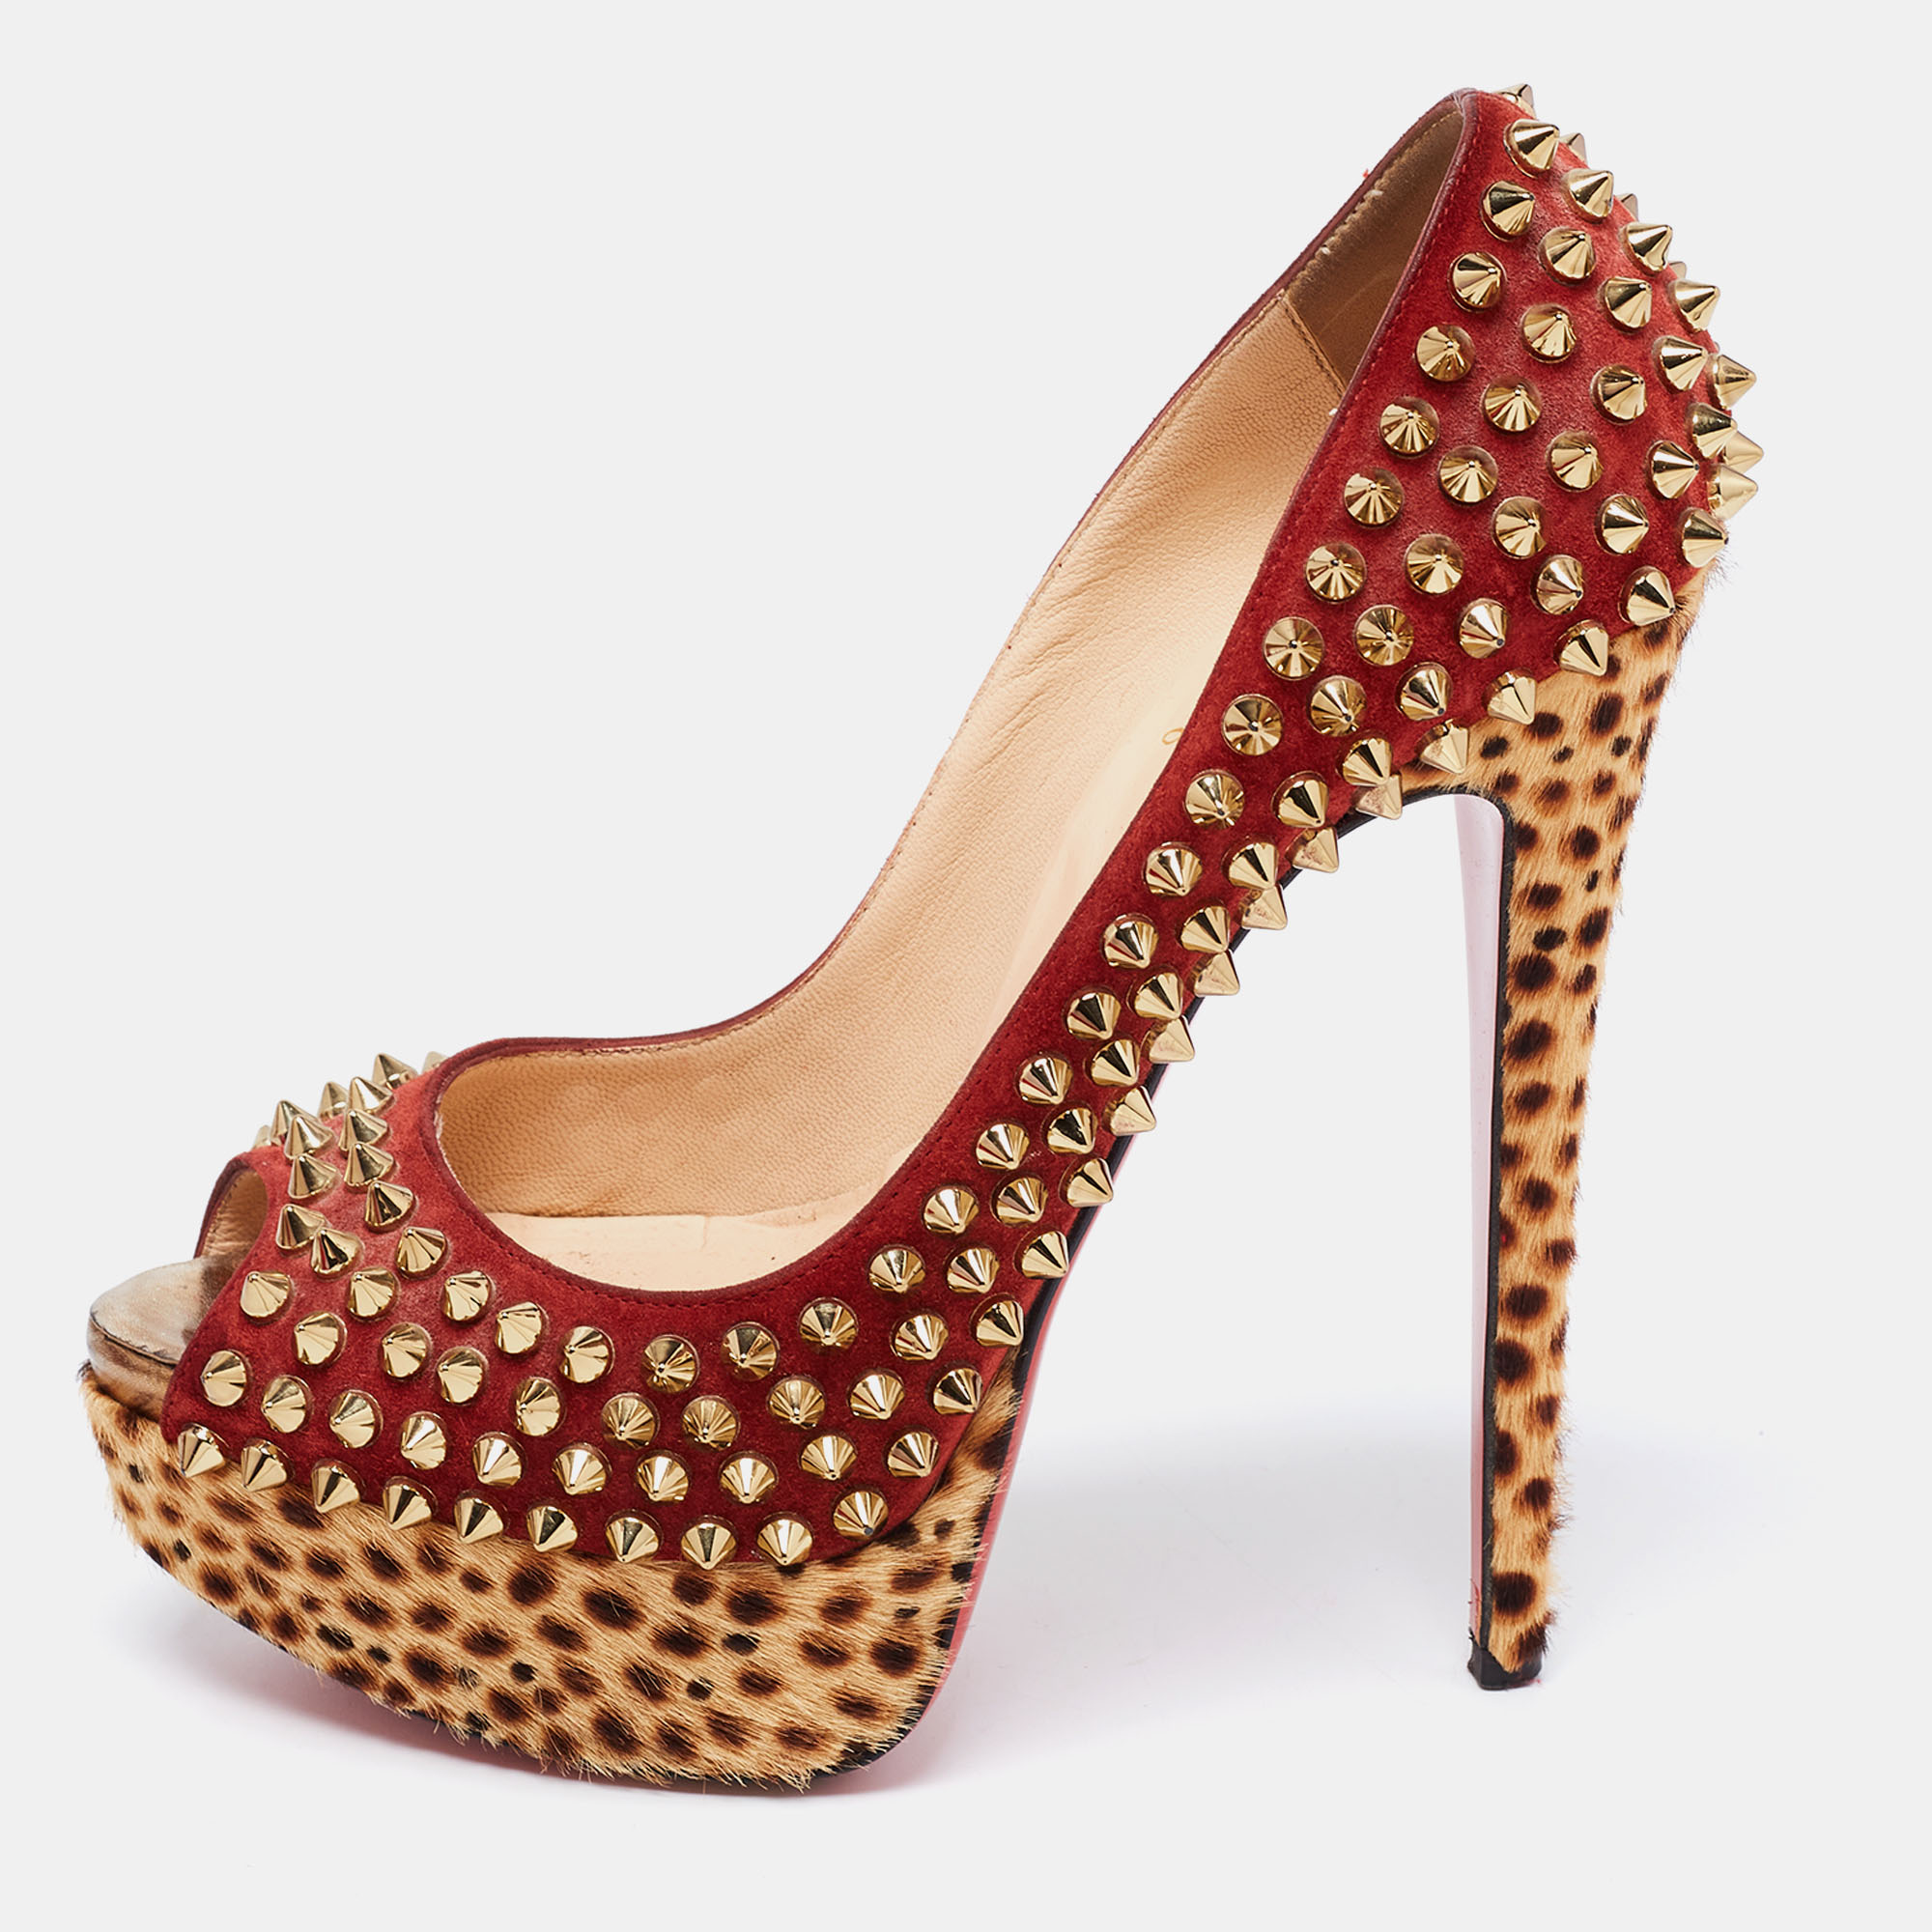 Christian Louboutin Tri-Color Suede And Leopard Print Calf Hair Lady Peep Spikes Platform Pumps Size 36.5